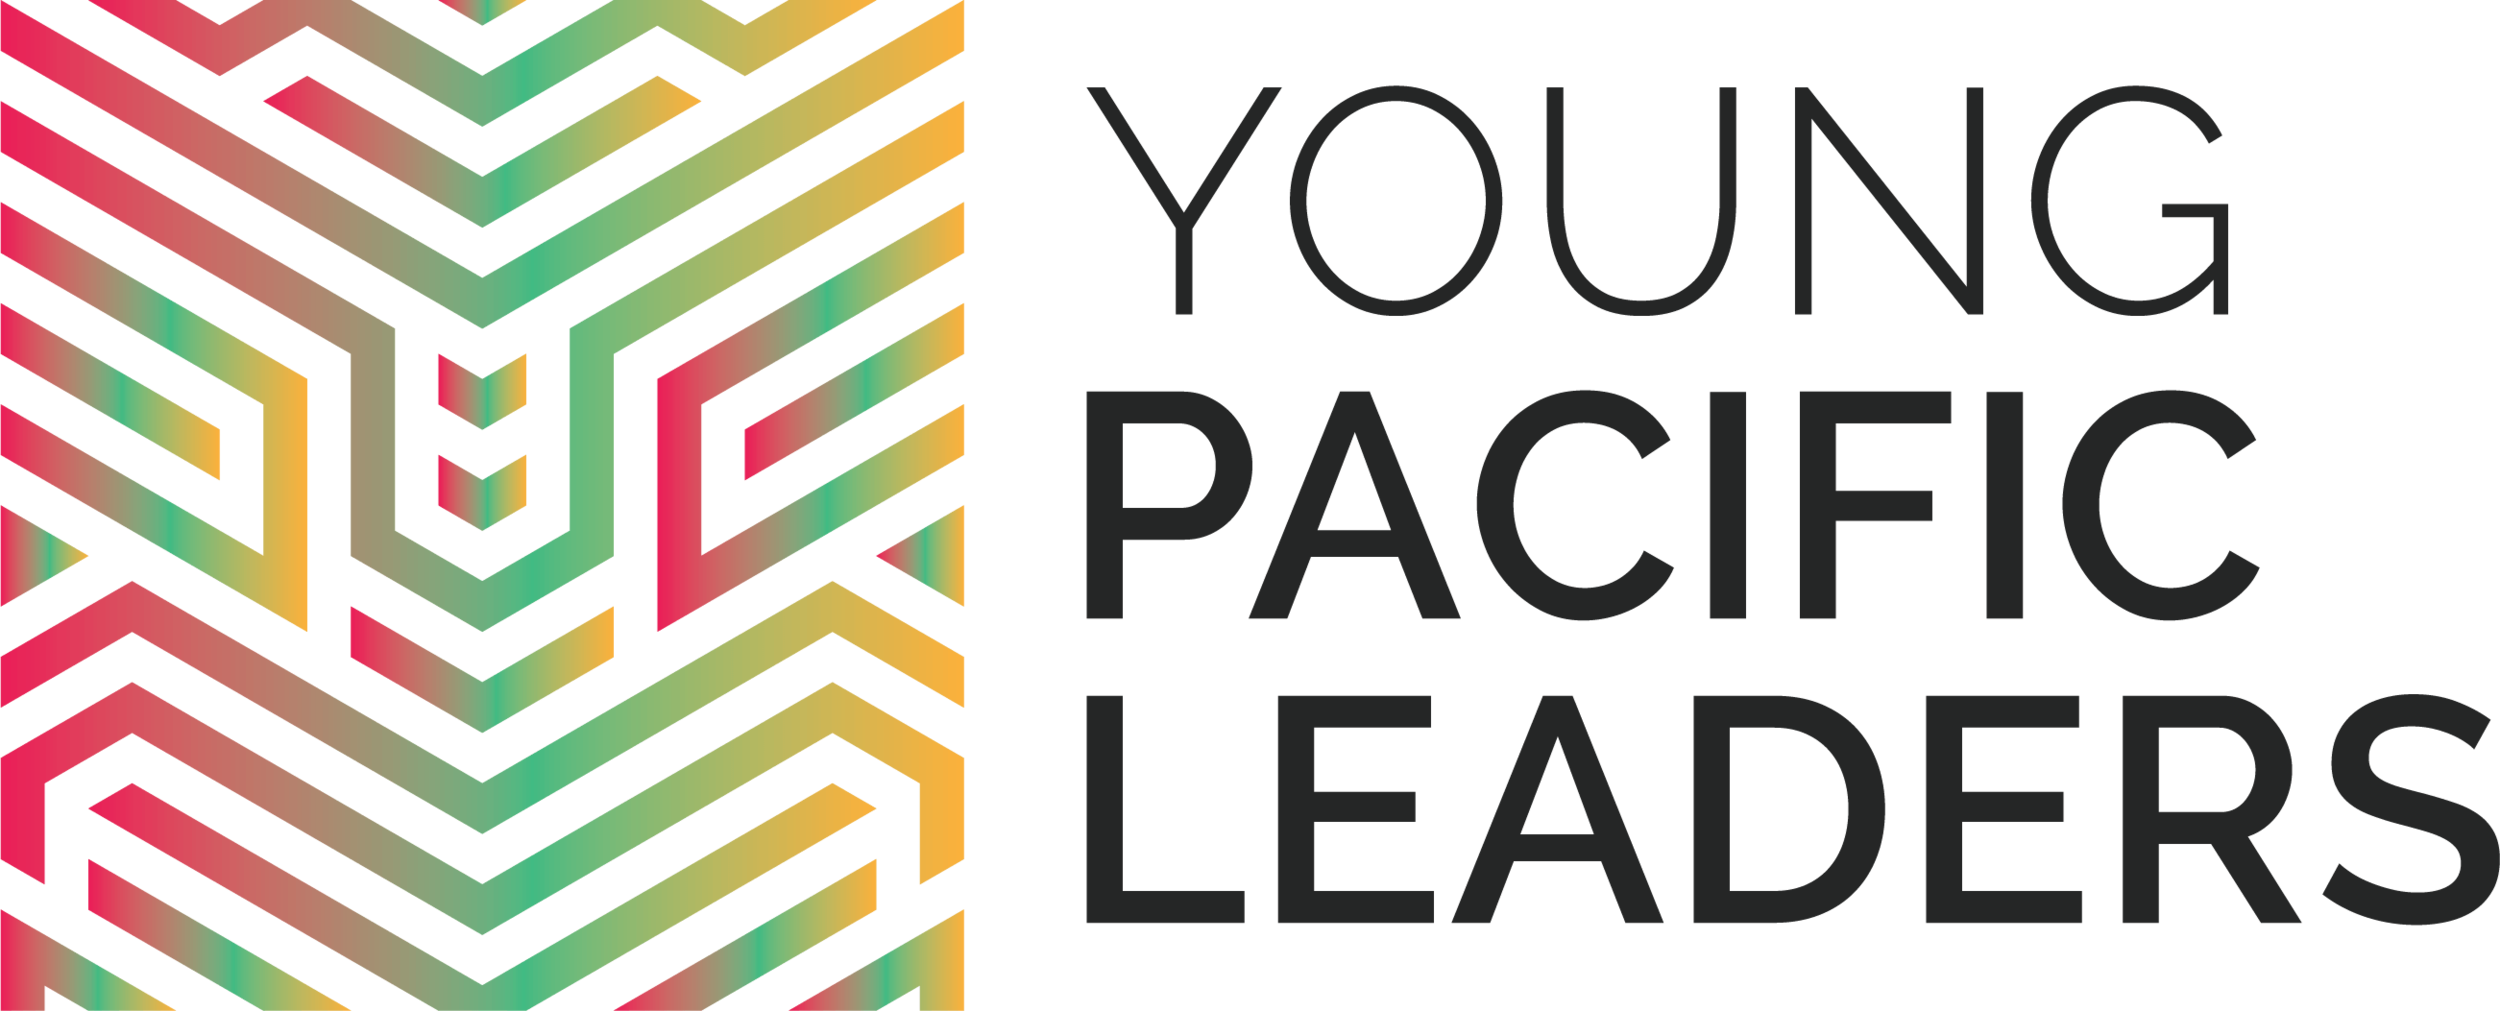 z. Young Pacific Leaders.png